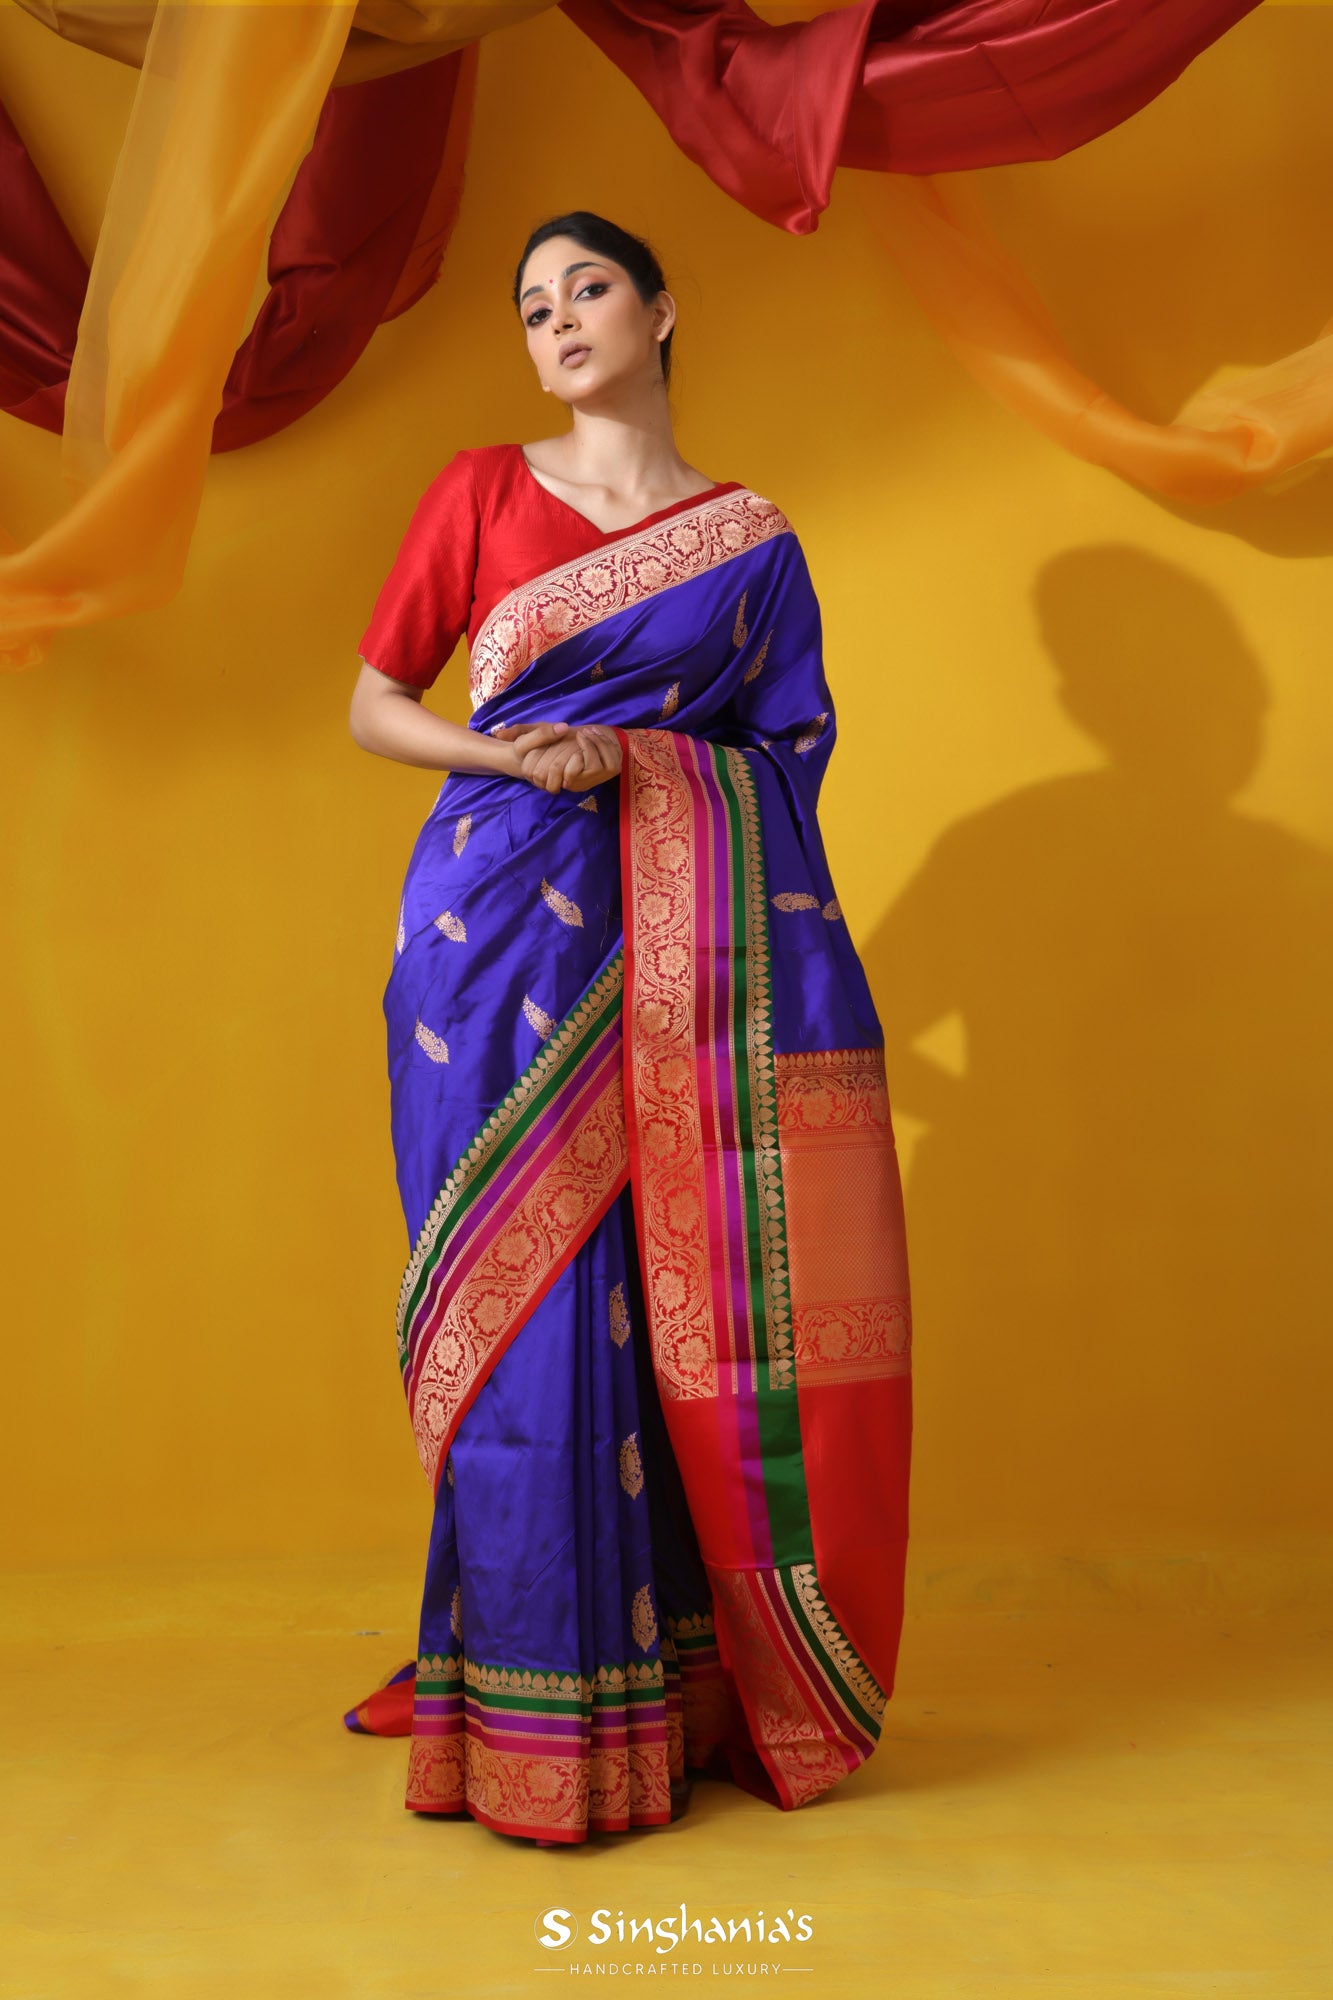 Pure Silk Sarees Online of the best quality by AdiMohiniMohanKanjilal